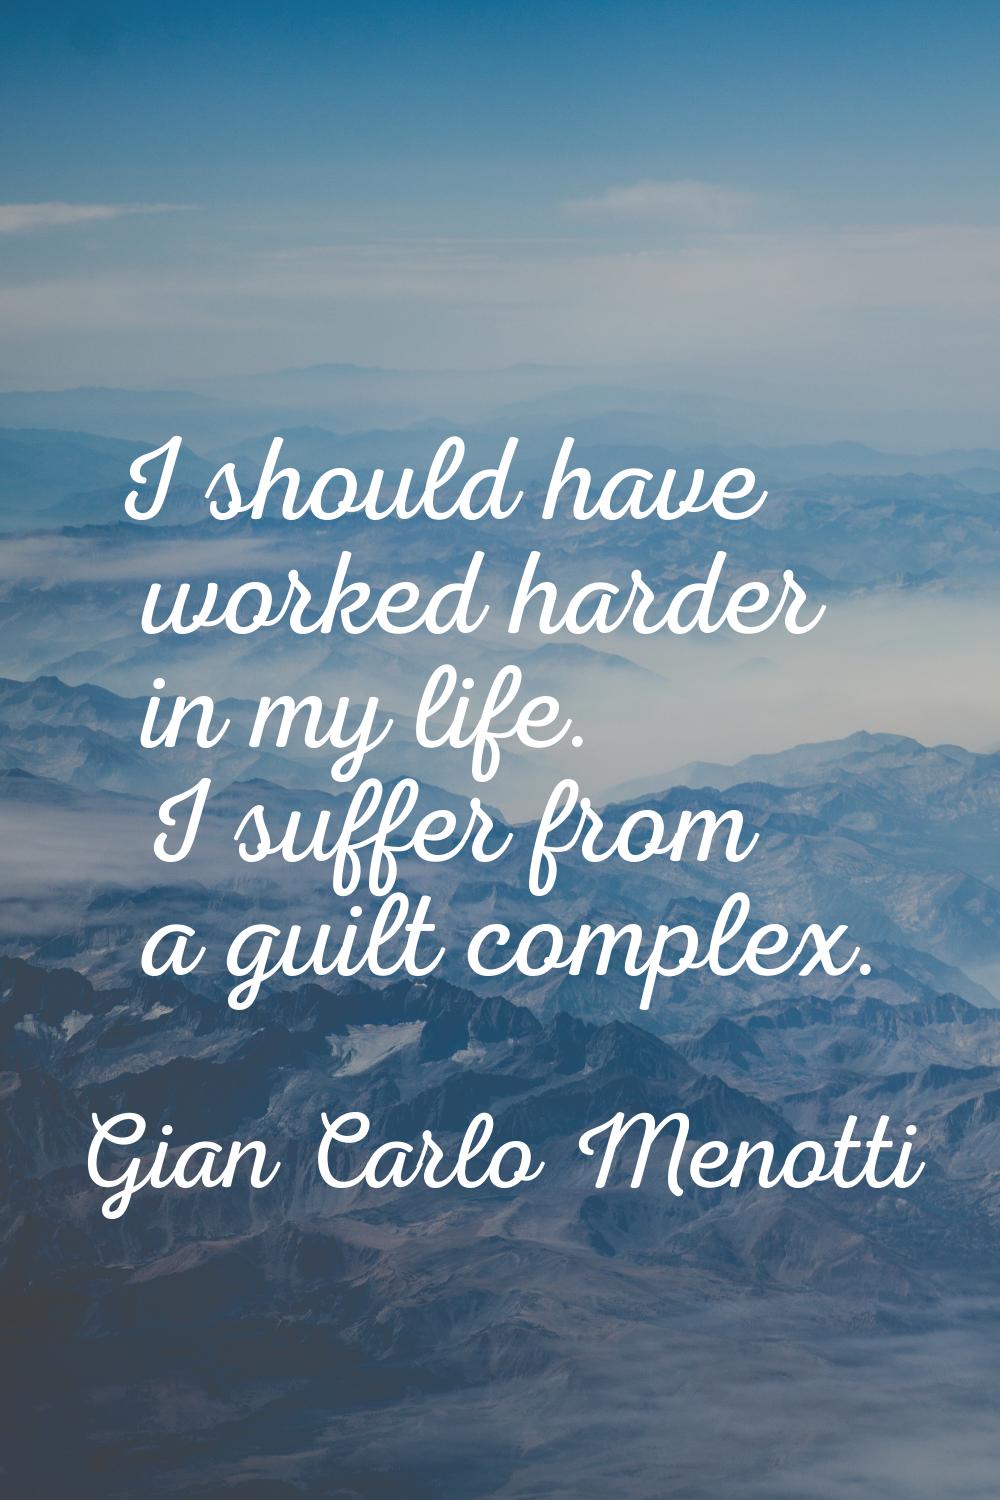 I should have worked harder in my life. I suffer from a guilt complex.